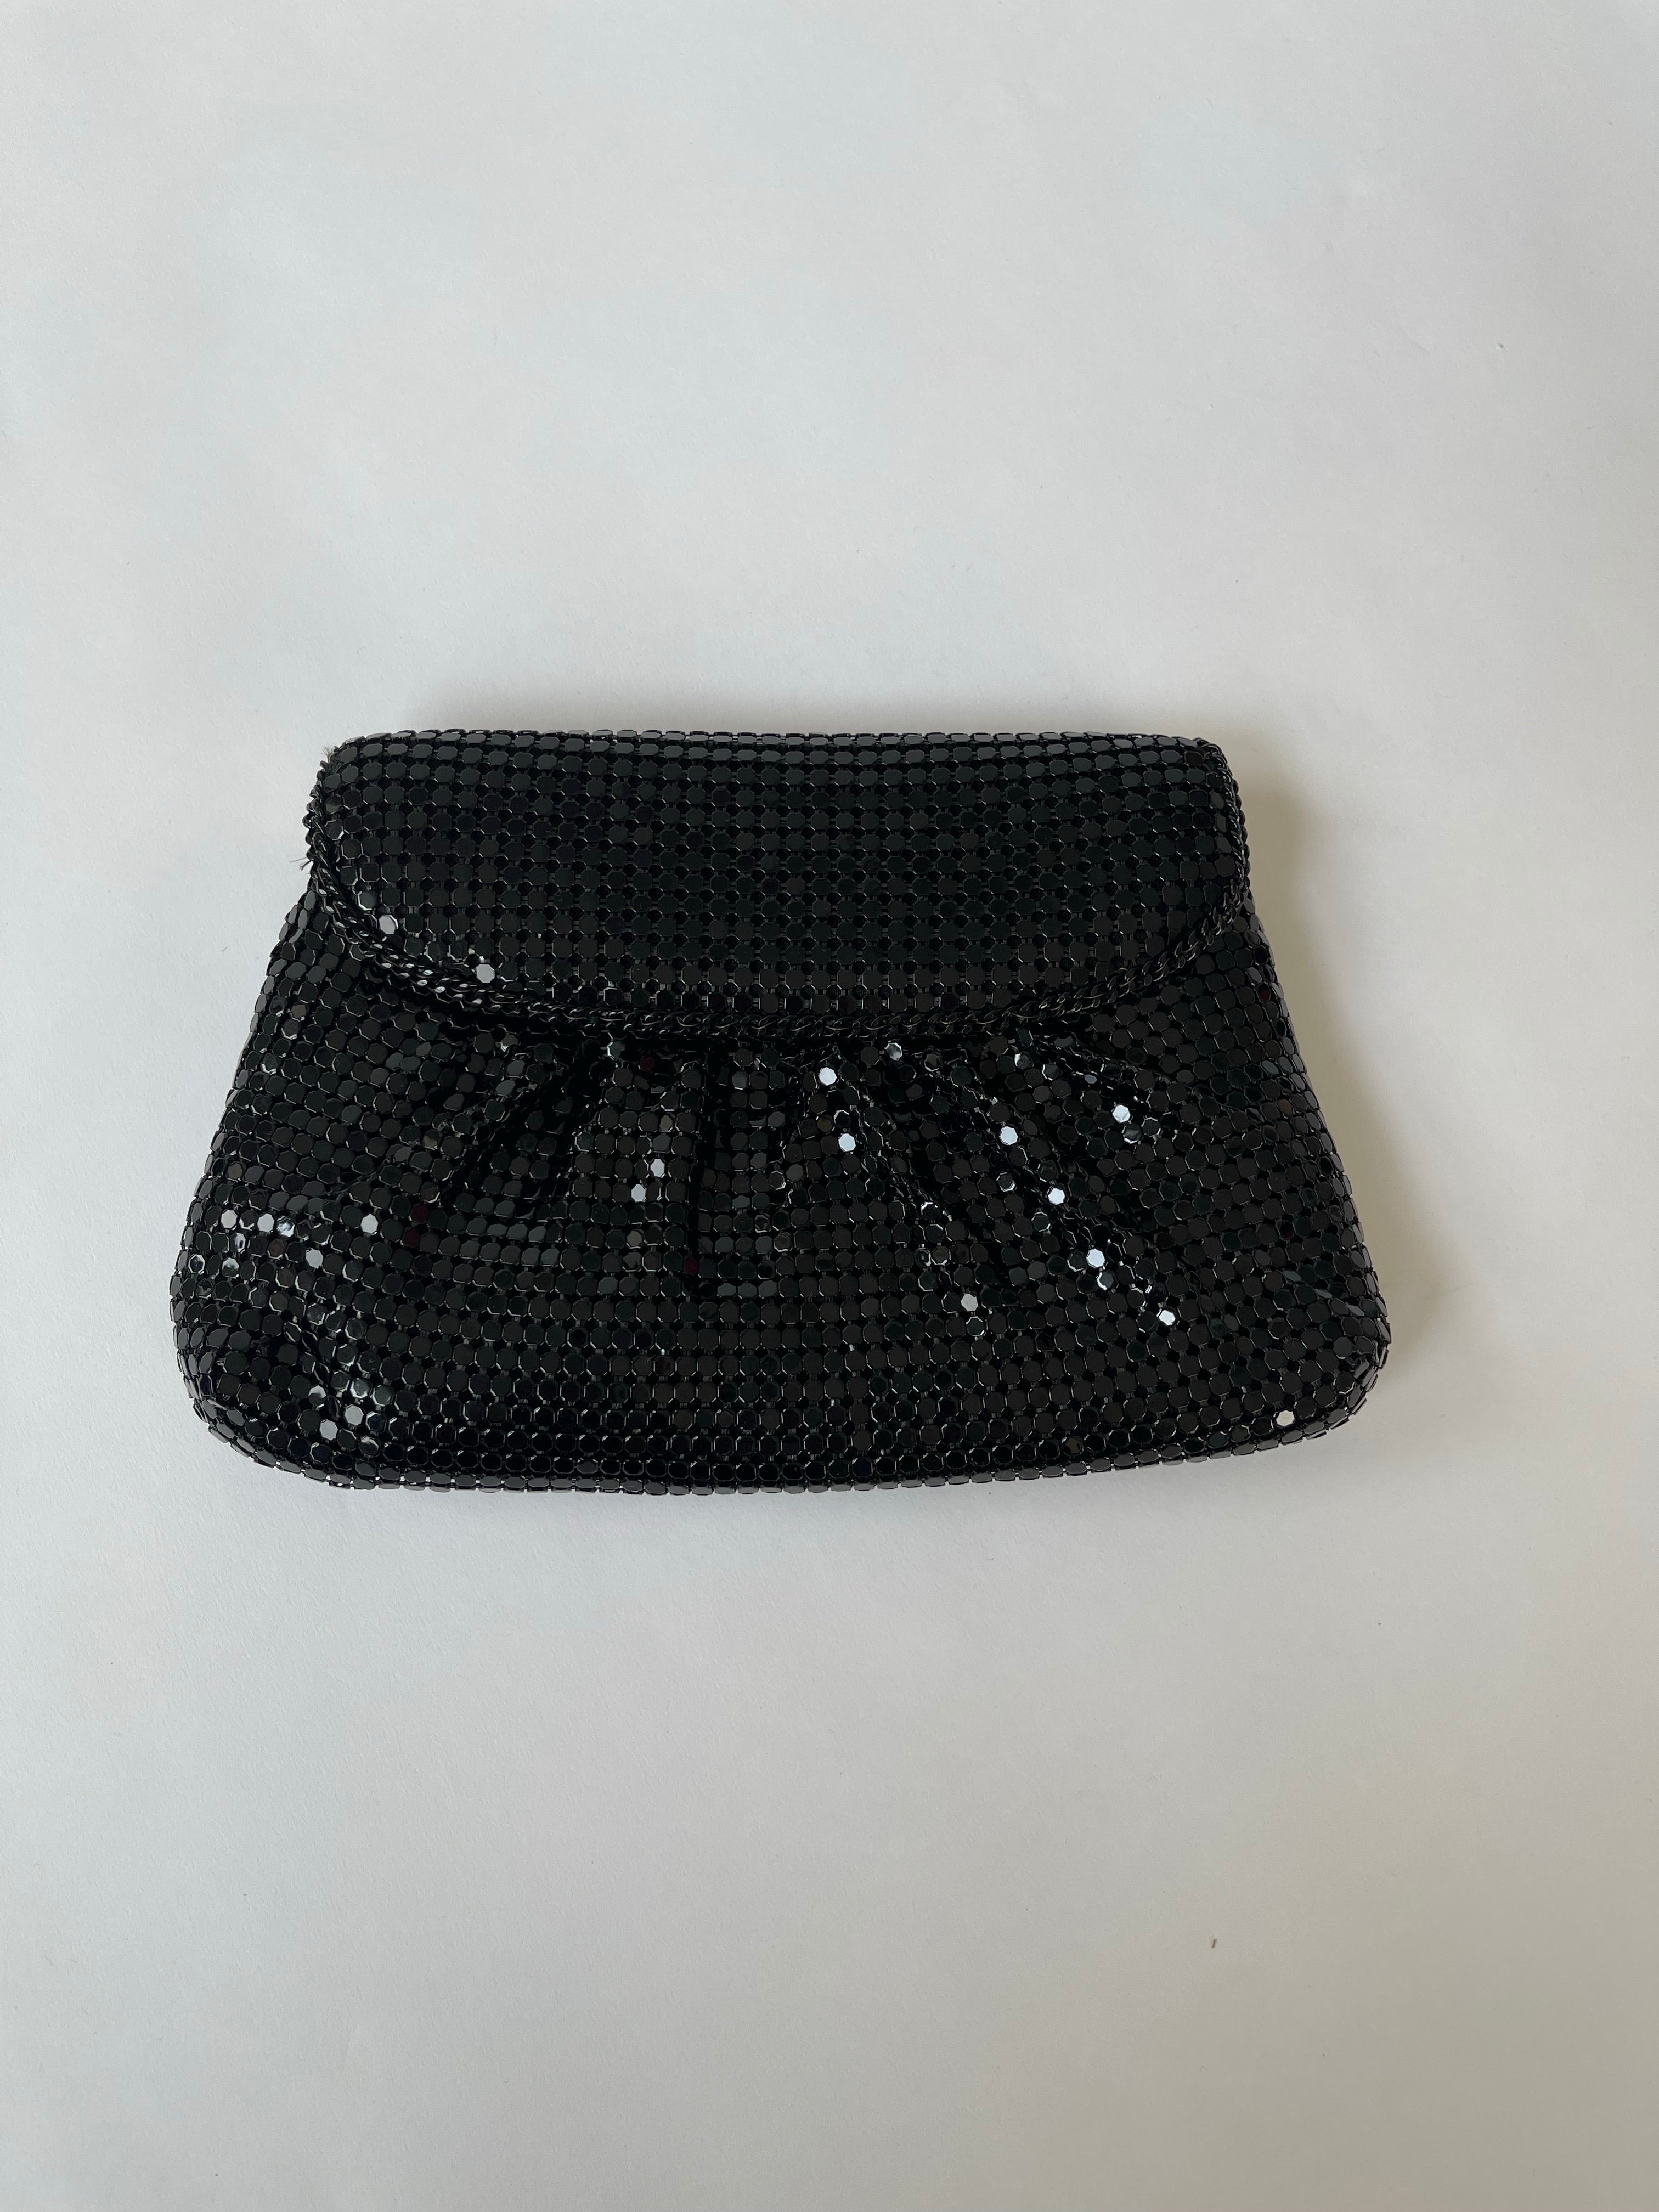 Vintage Black Bead and Sequin Evening Bag